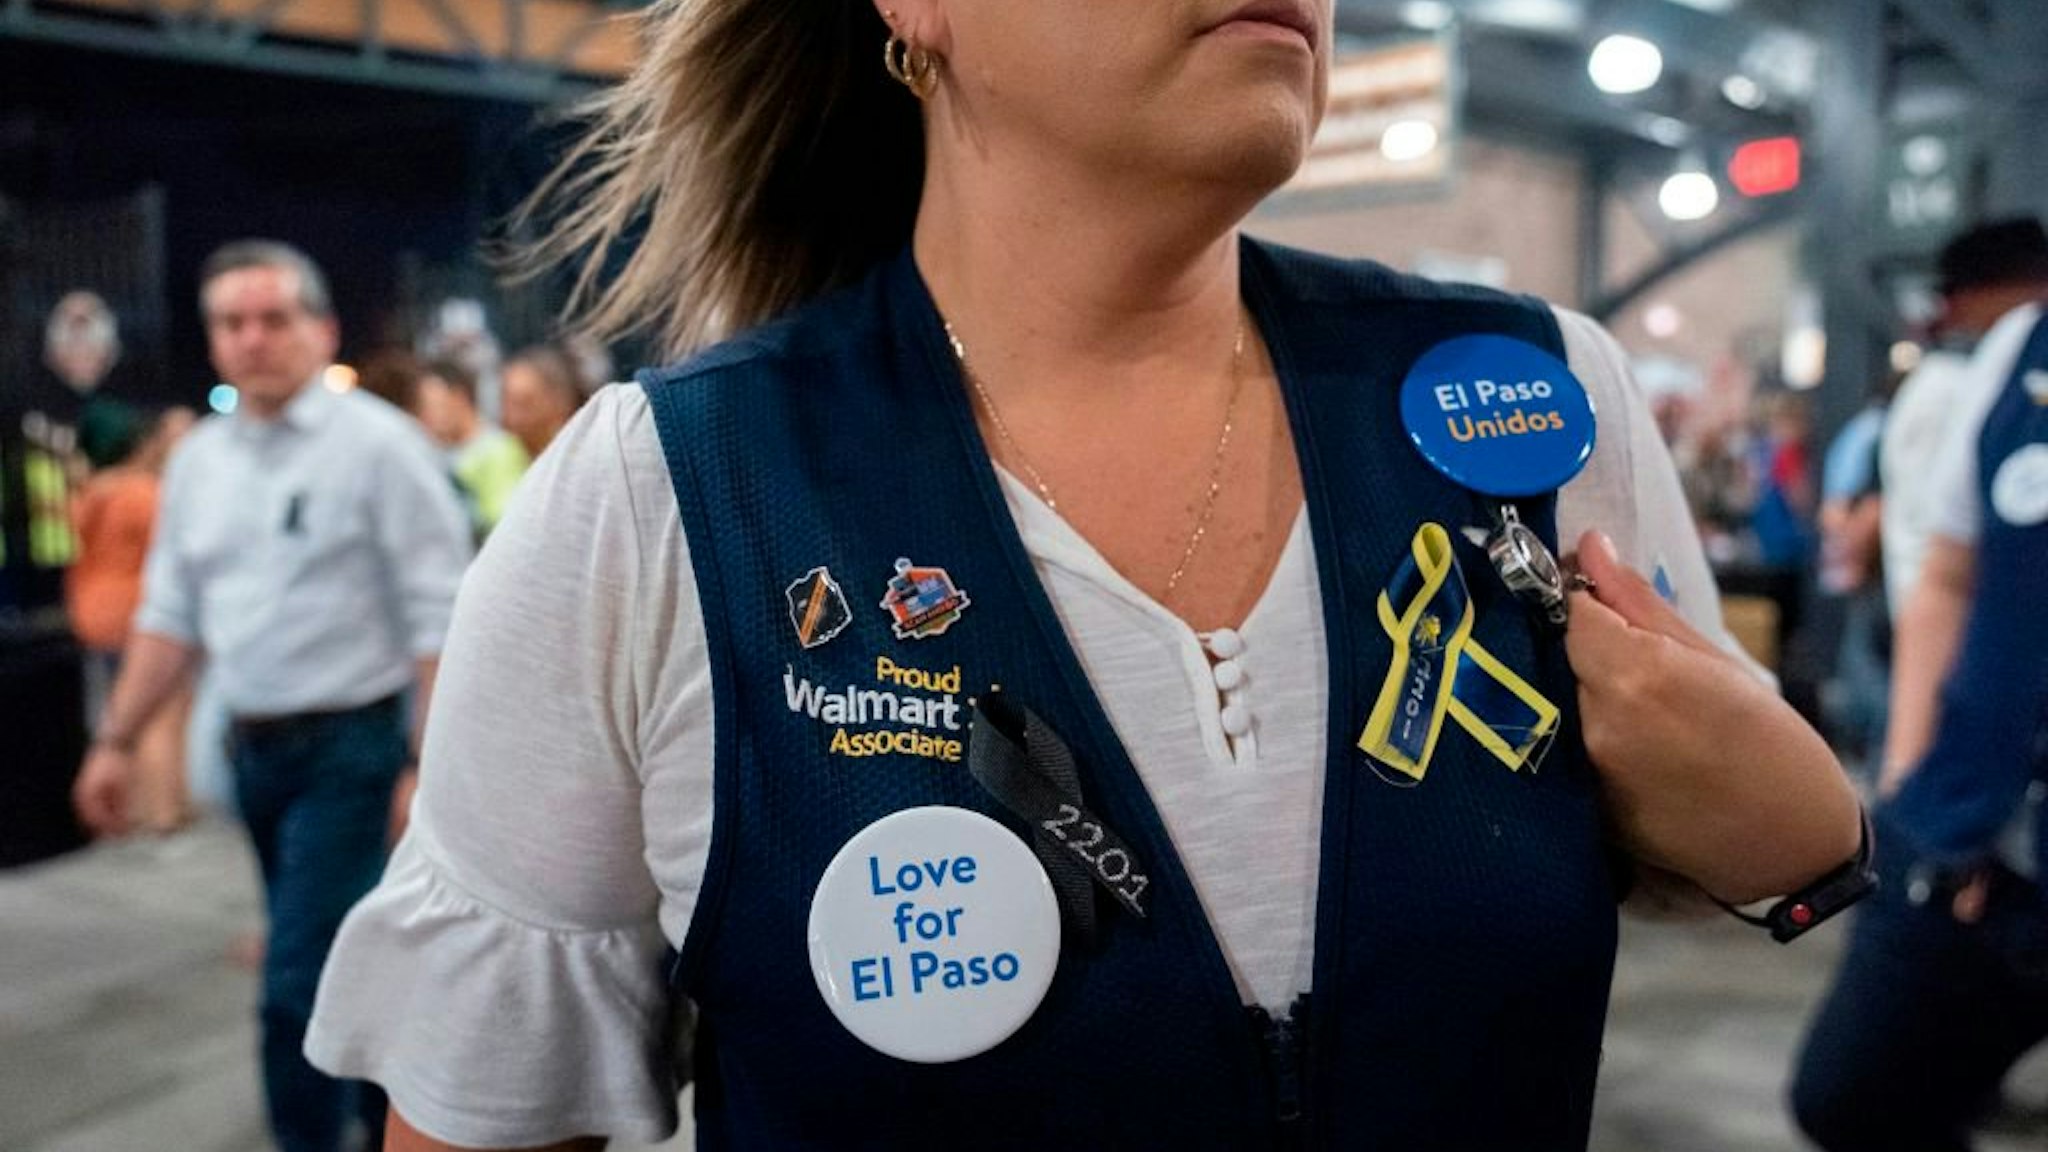 A Walmart employee attends a community memorial service for the 22 victims of the mass shooting at Southwest University Park in El Paso, Texas on August 14, 2019.